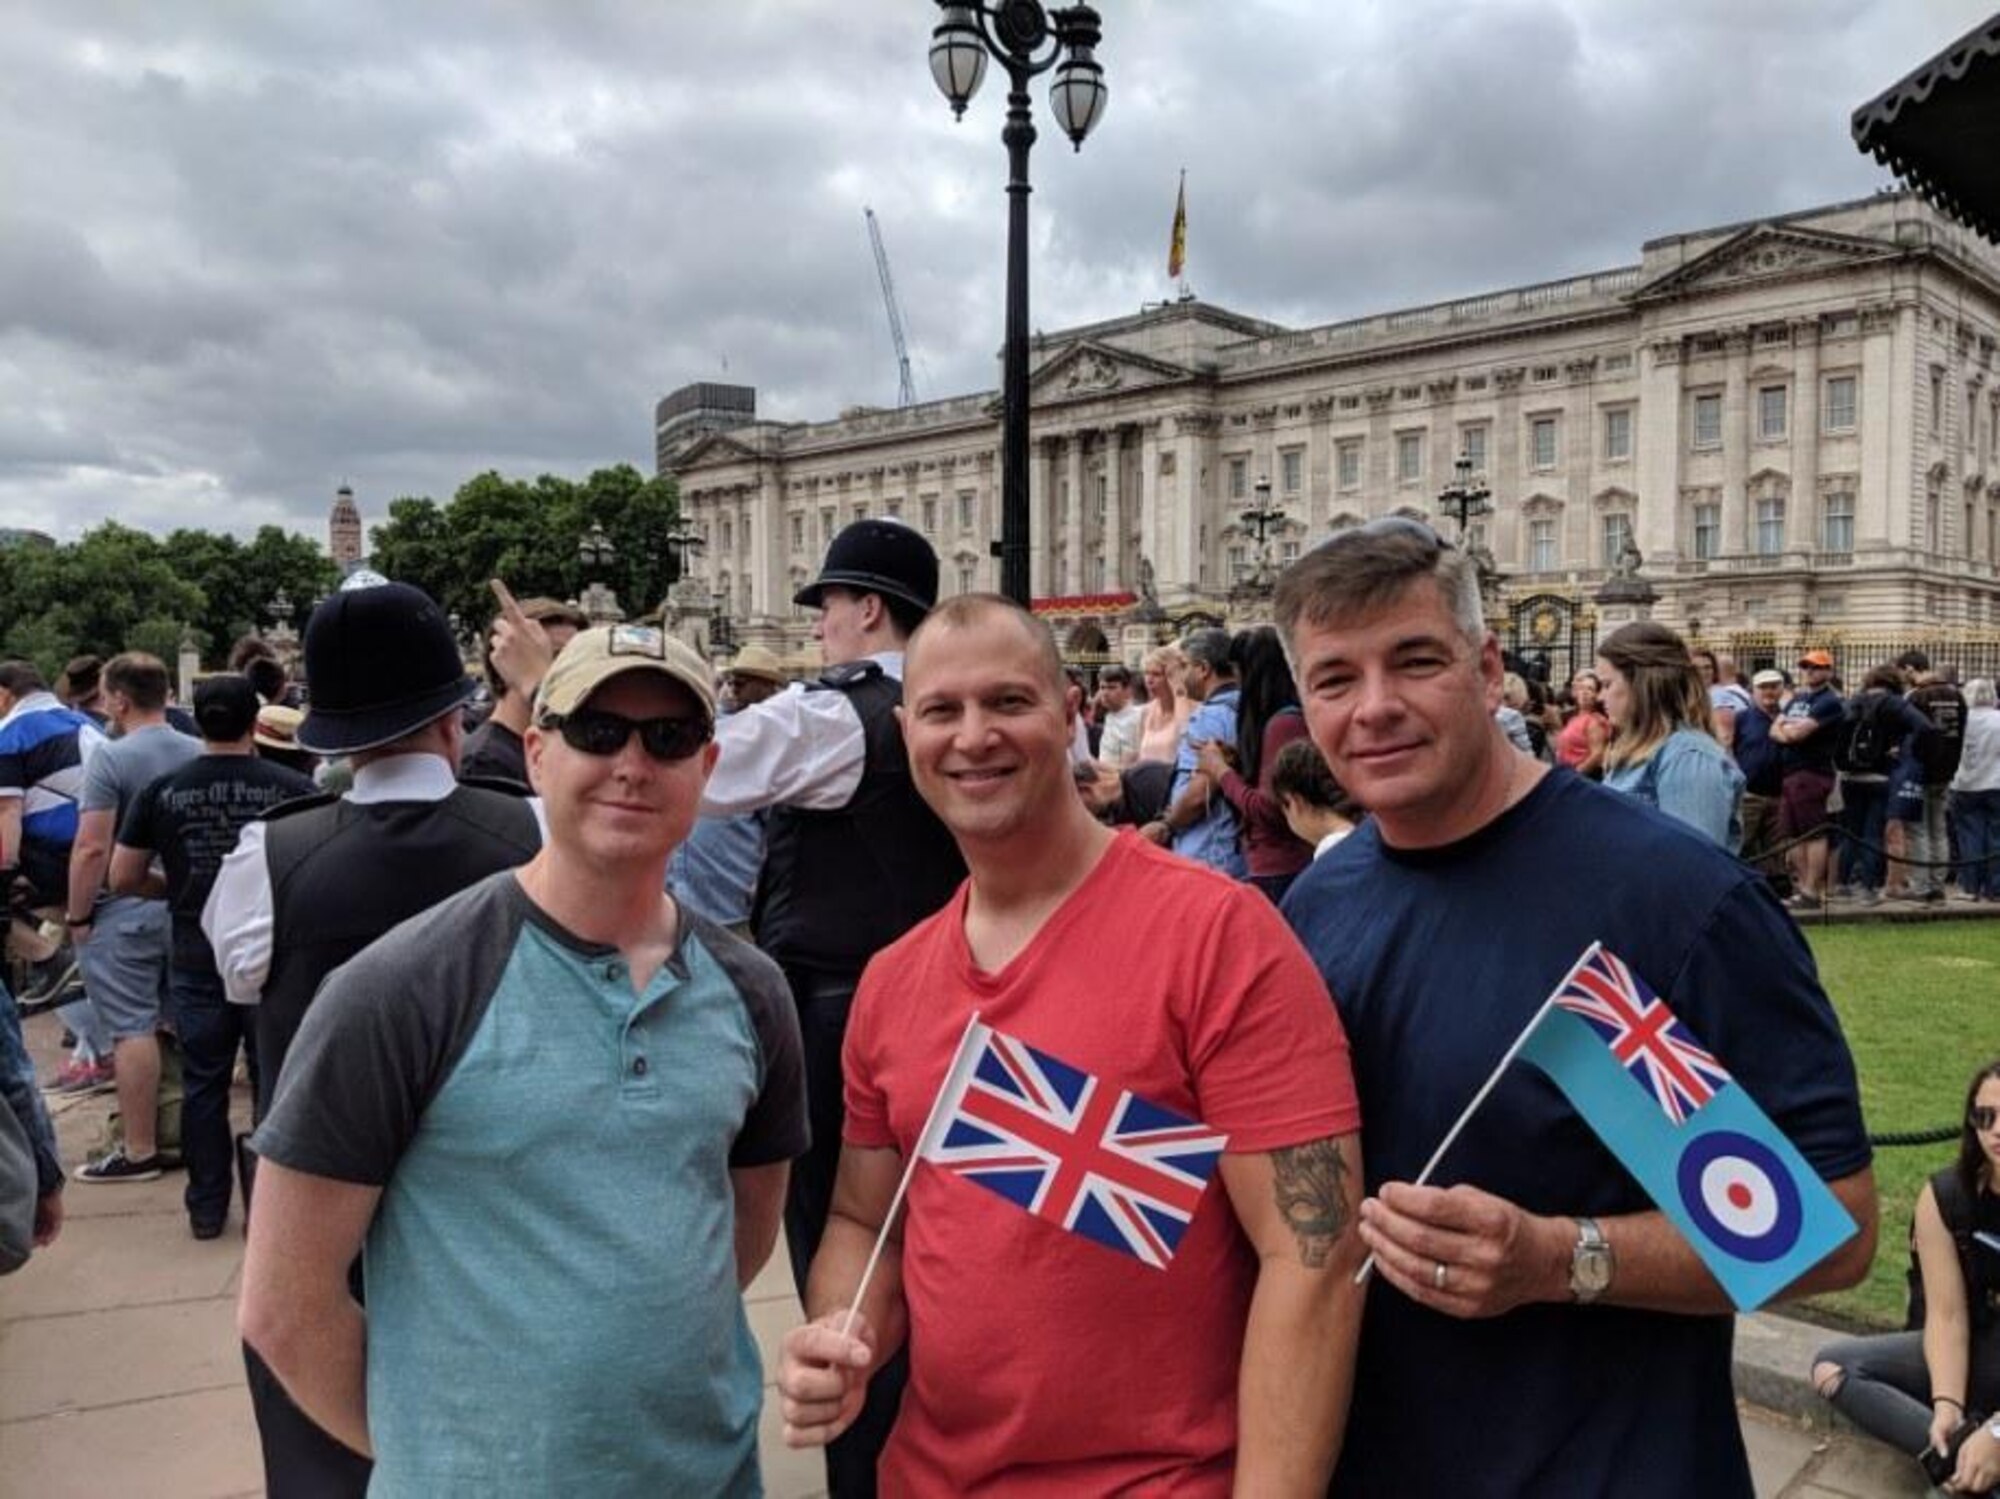 U.S. Air Force Staff Sgt. Jason Chipley, 145th Logistics Readiness Squadron, along with members of the United States Air Force Reserves pose in front of Buckingham Palace during the RAF100 parade, London, United Kingdom, July 10, 2018. The Military Reserve Exchange Program not only allows military members to learn and exchange ideas about their respective career fields, but it also provides the opportunity to be immersed in the host country’s culture.